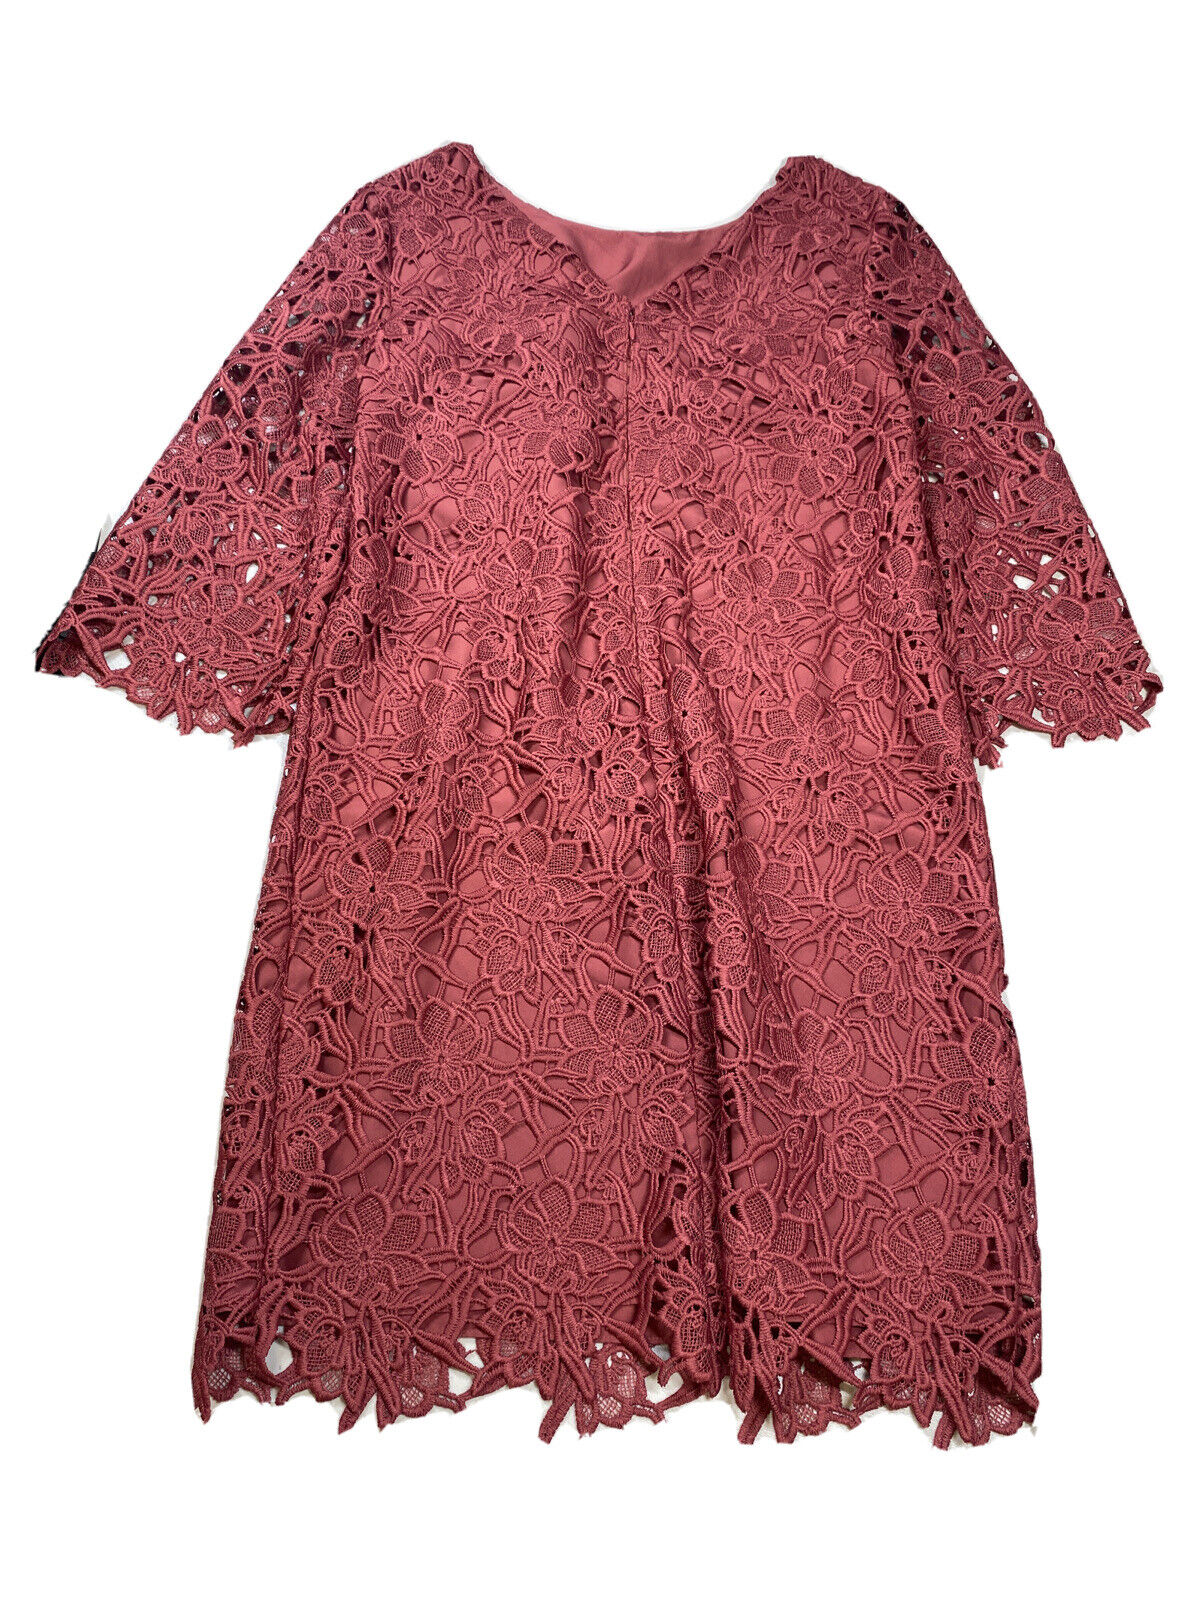 Ann Taylor Women's Pink Large Lace Lined 3/4 Sleeve Shift Dress - 6